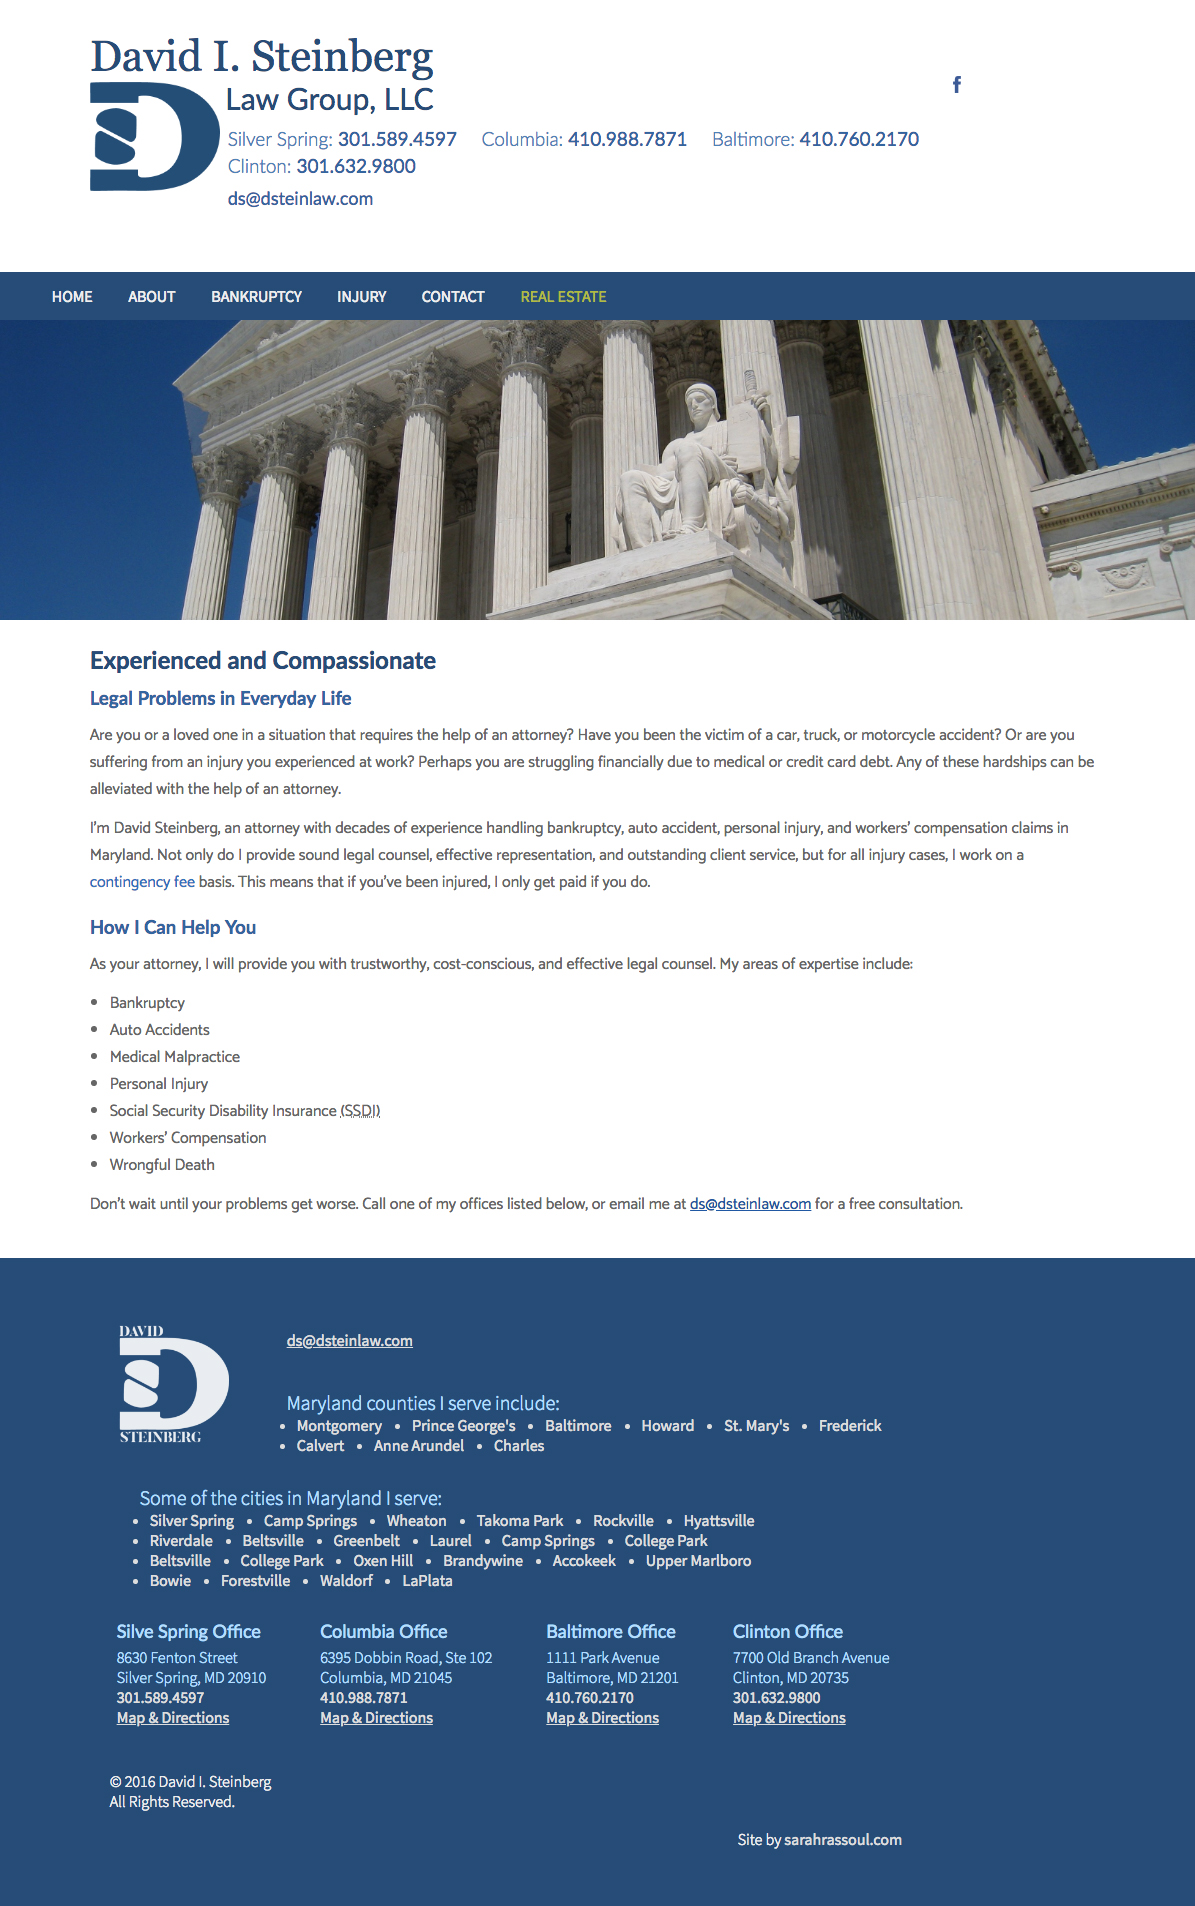 View of law website.